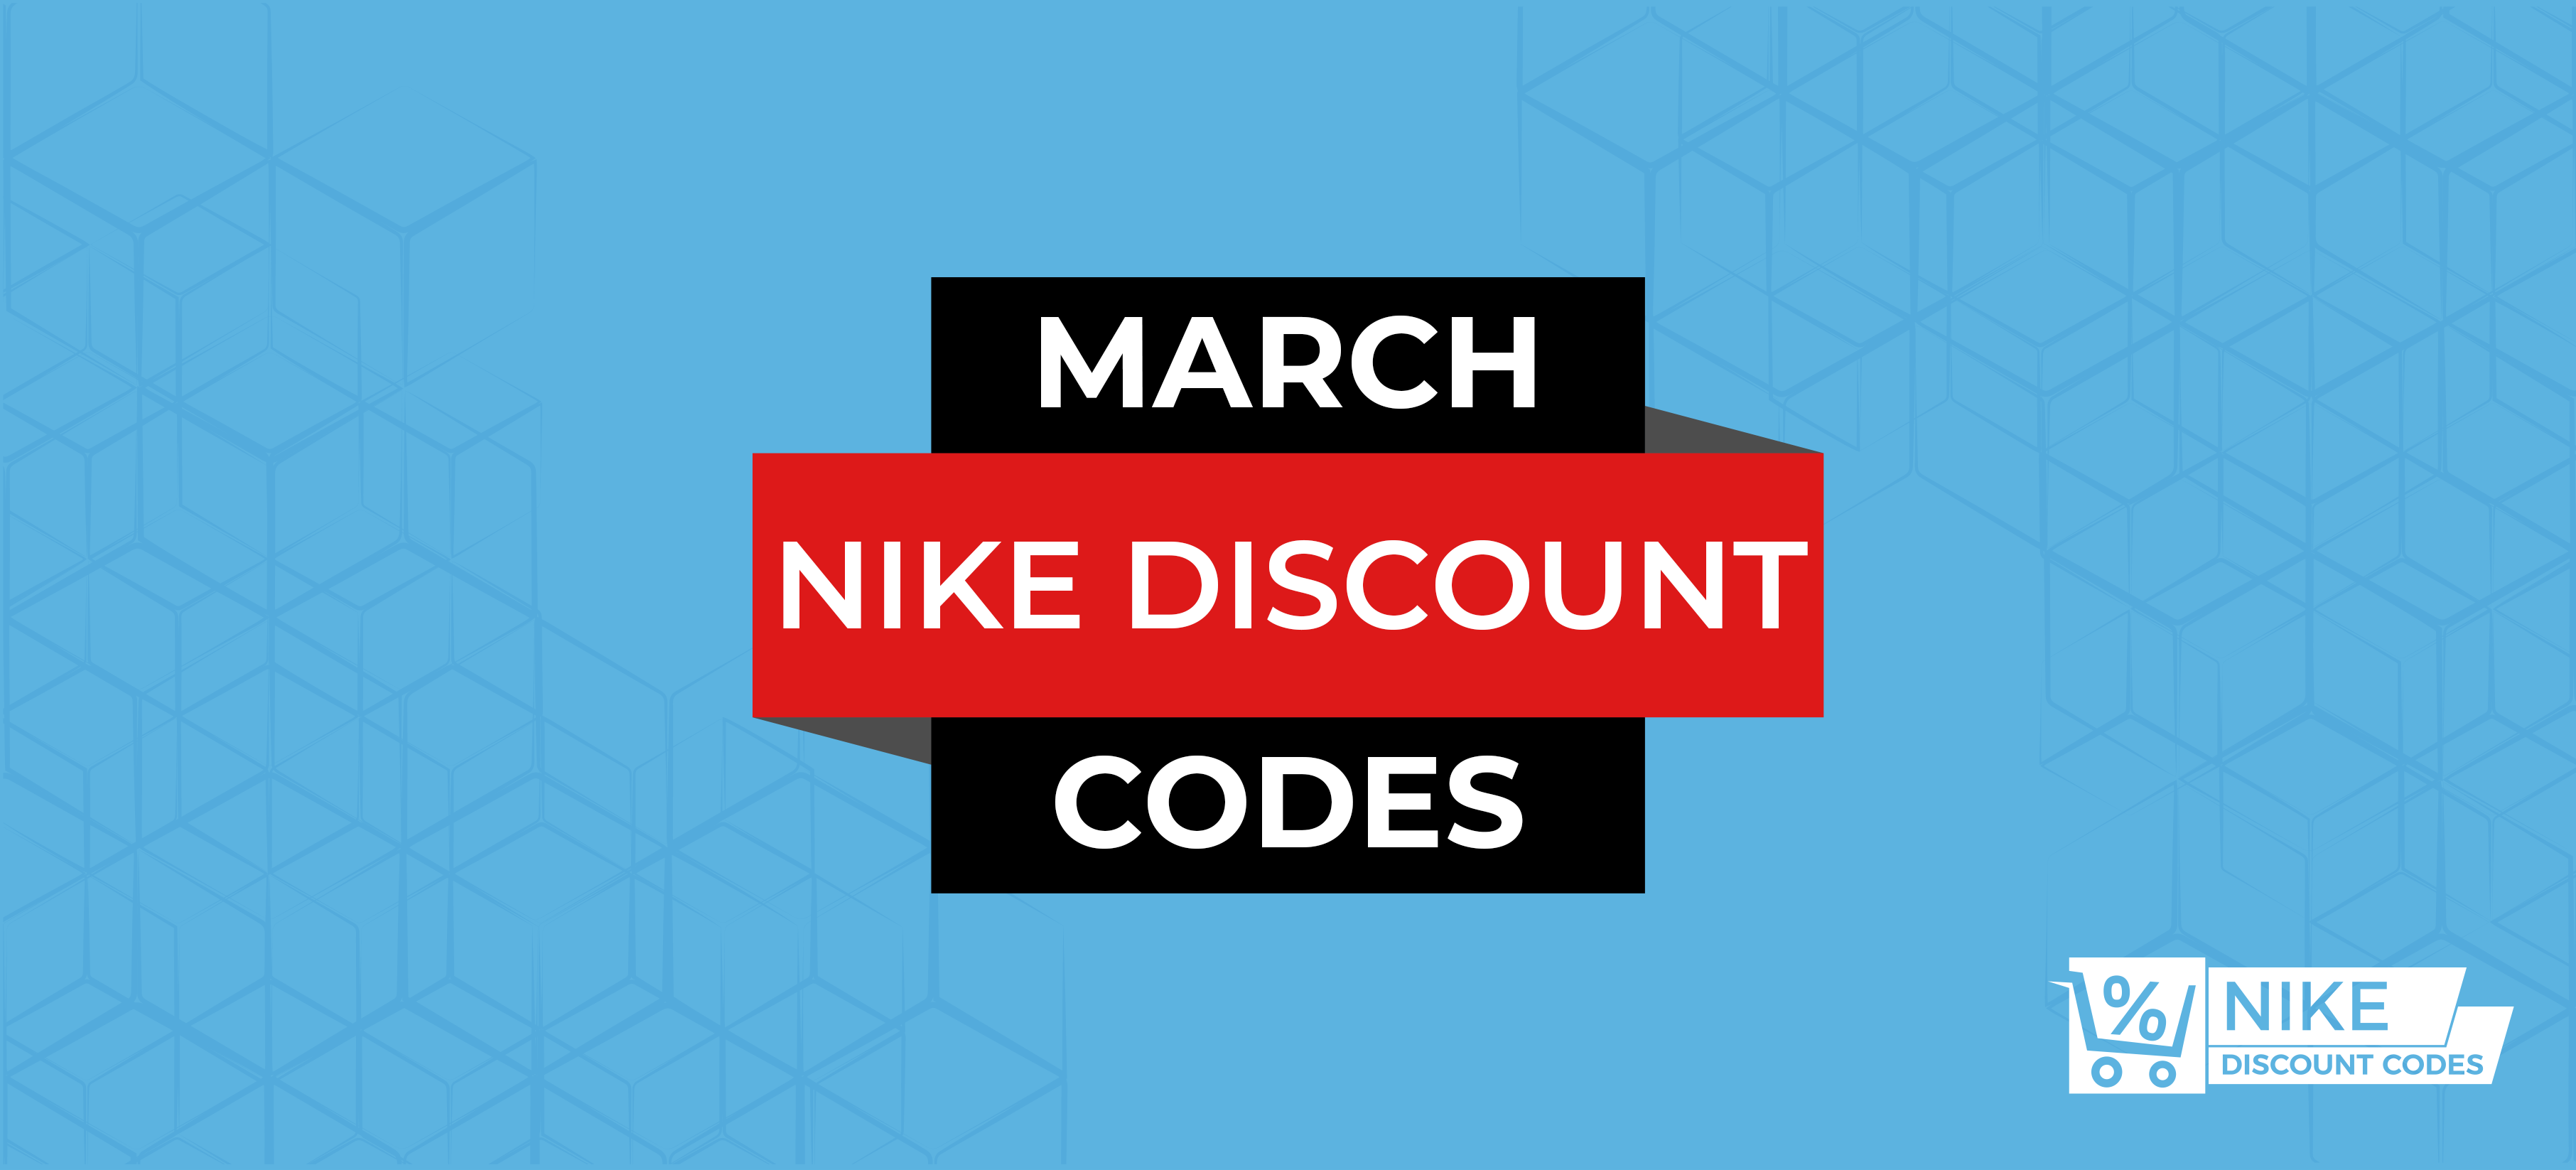 nike coupons march 2020